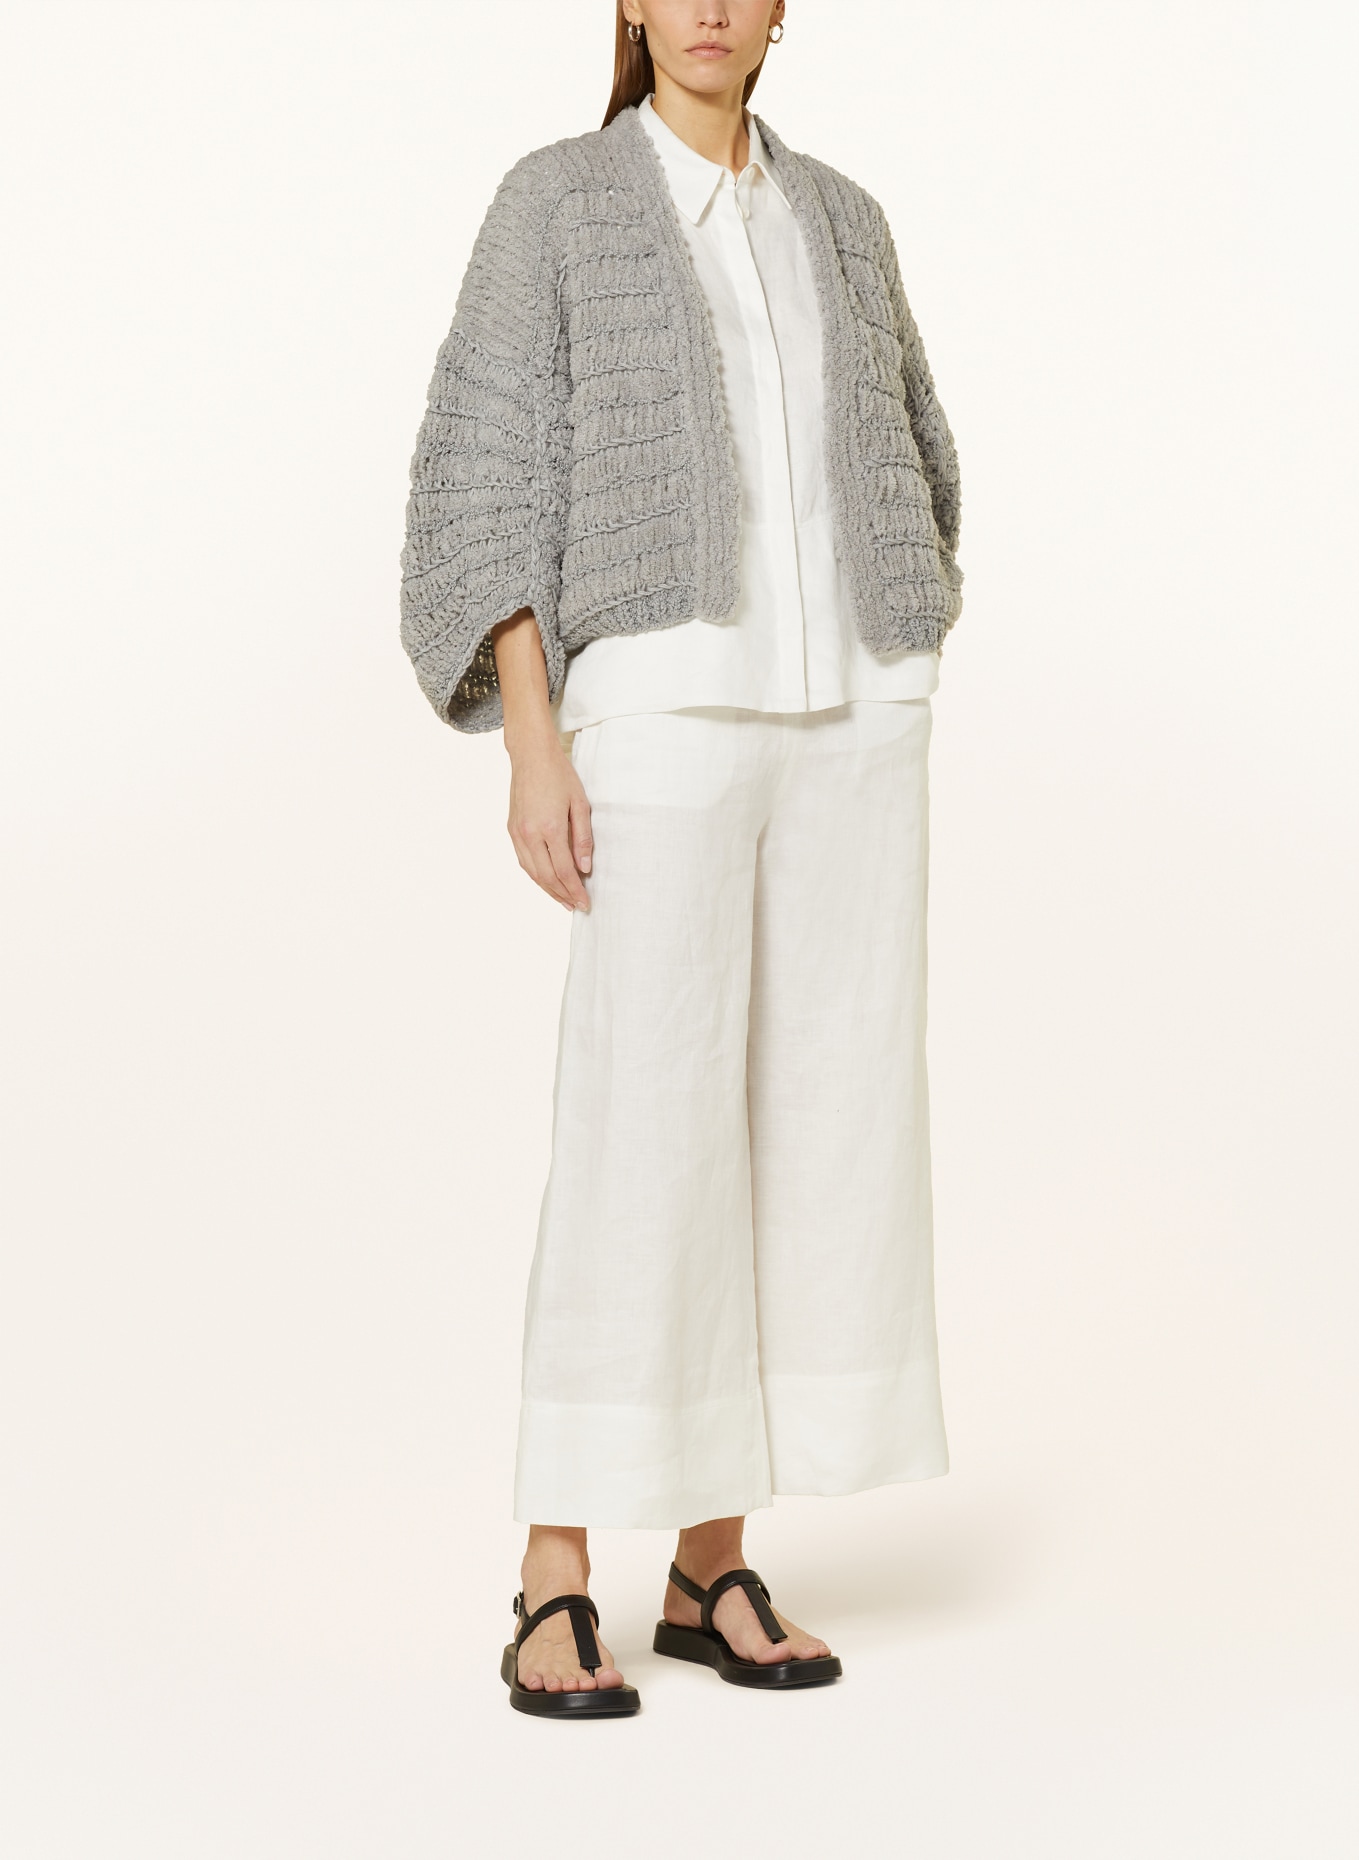 IRIS von ARNIM Knit cardigan TOTO with 3/4 sleeves, Color: GRAY (Image 2)